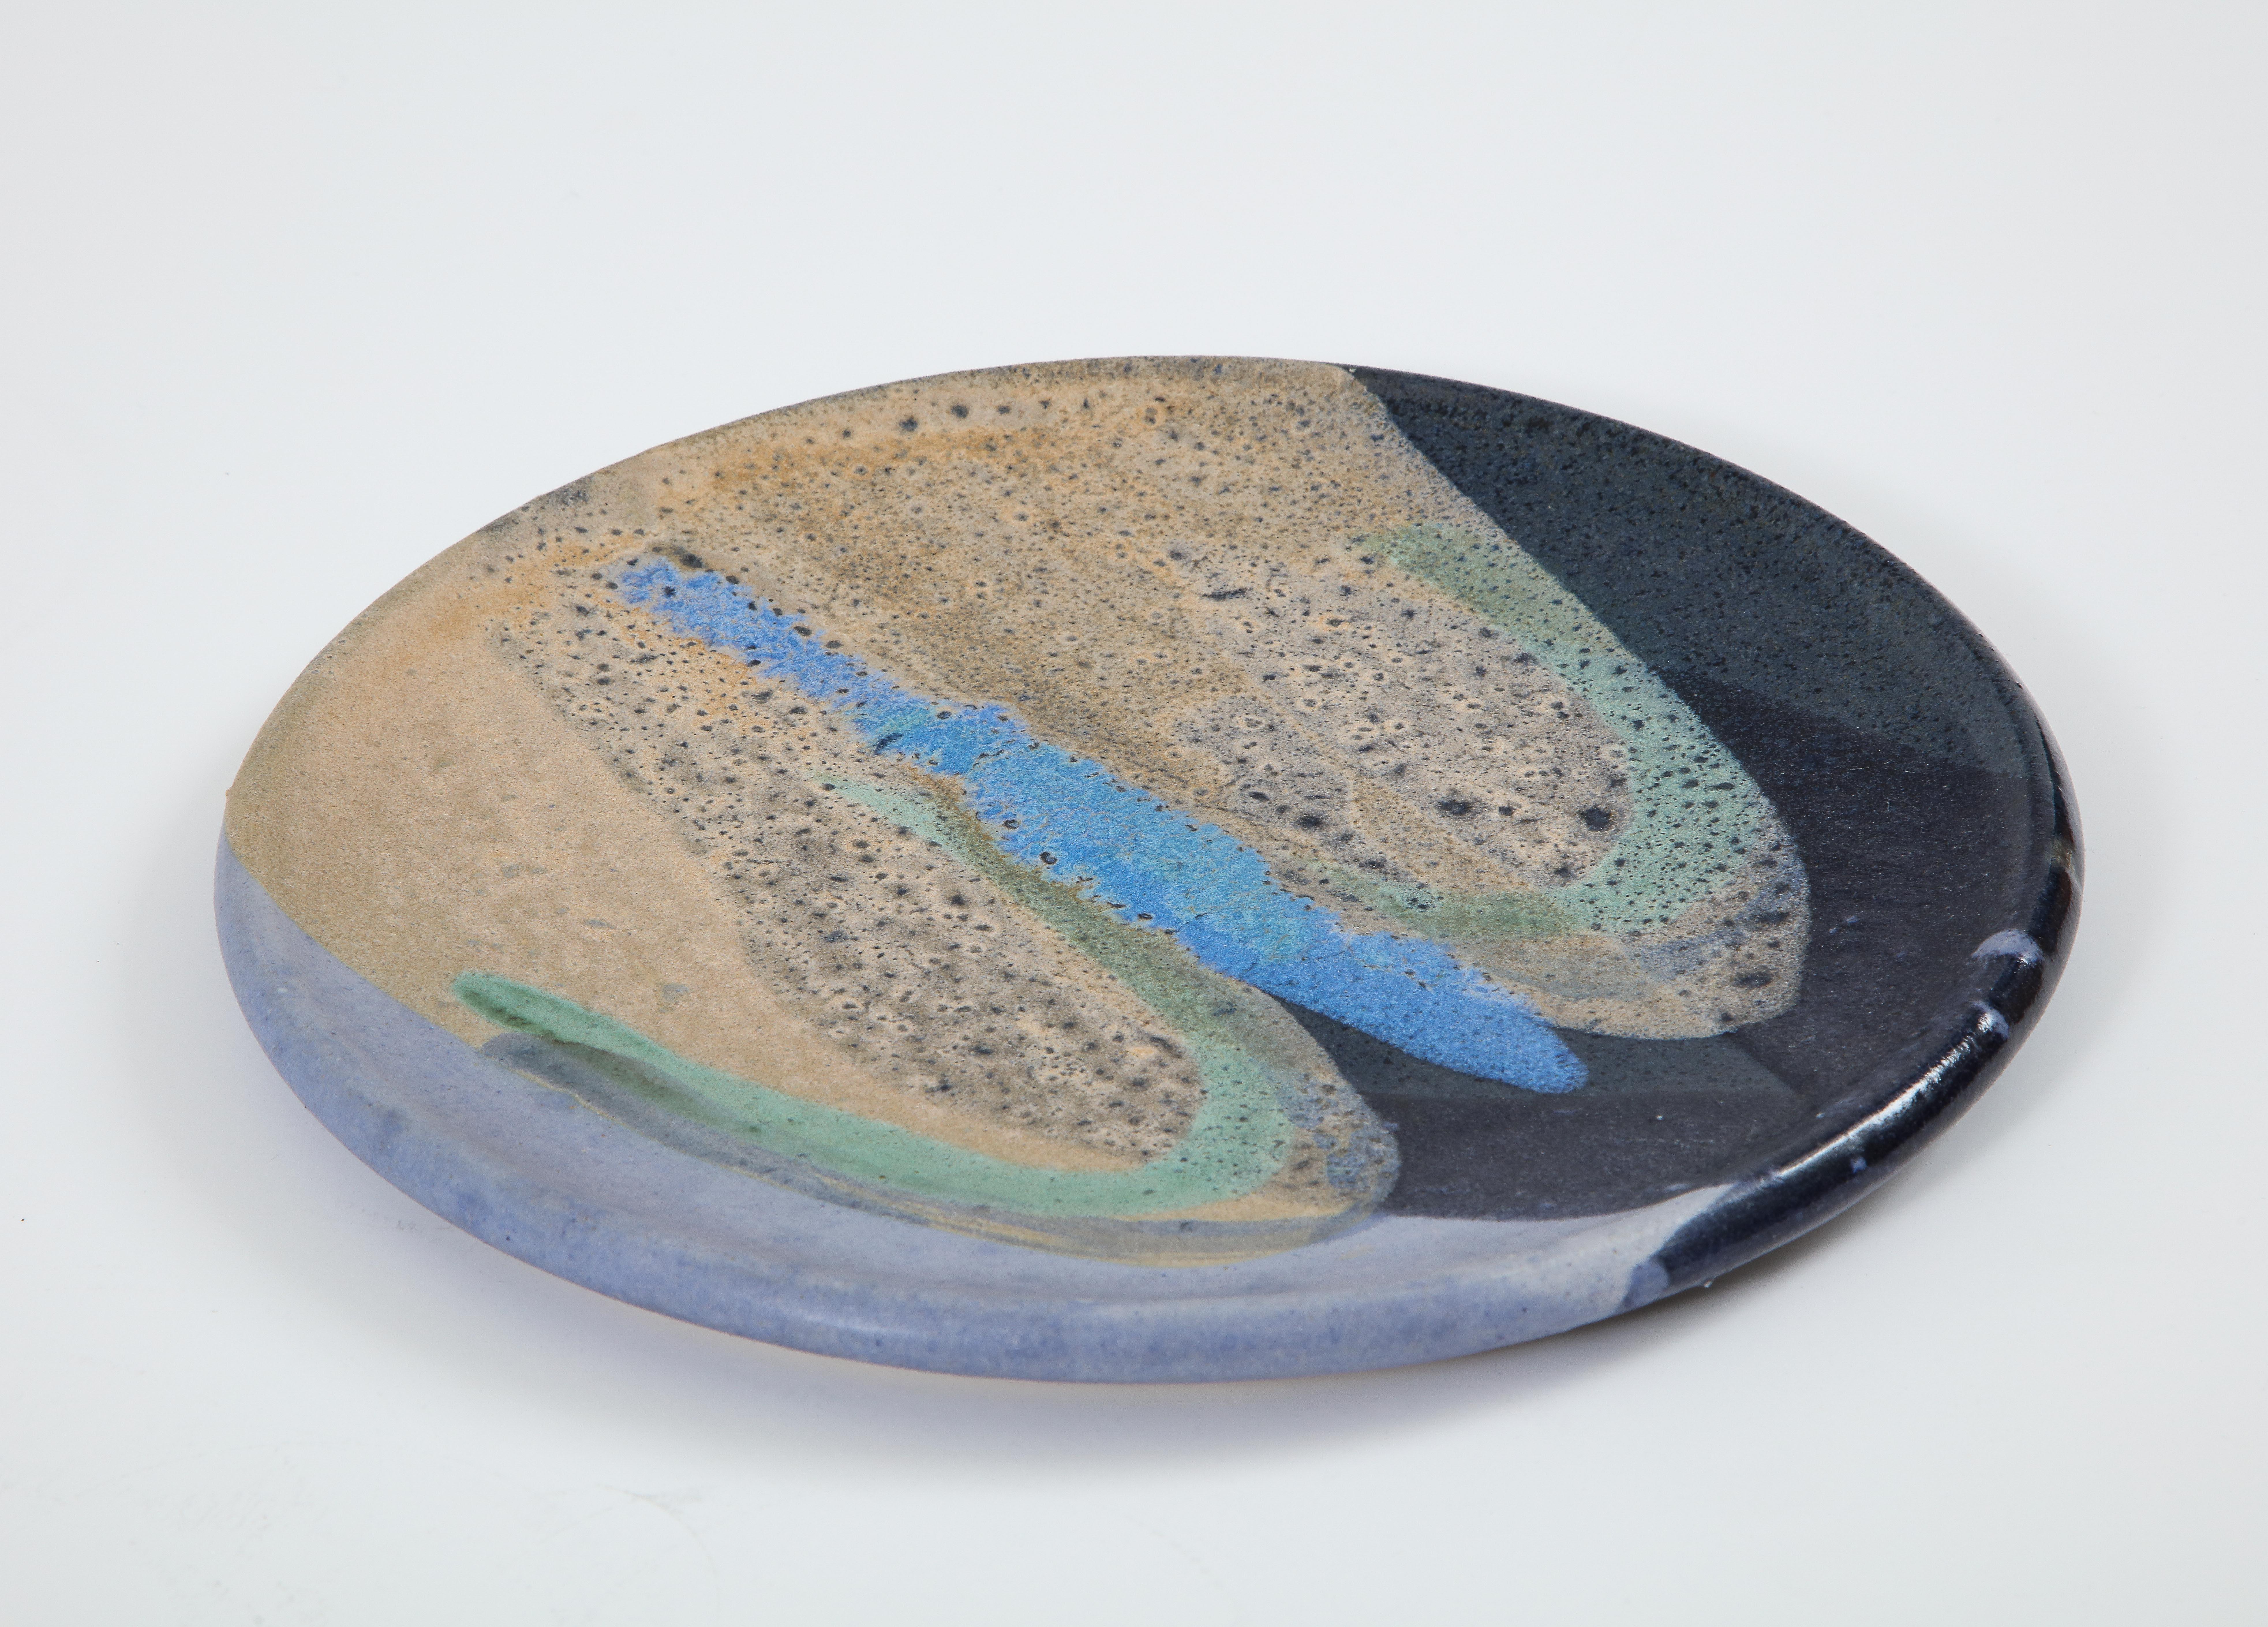 Ceramic plate with abstract enamel glaze, signed 'Helwig'.